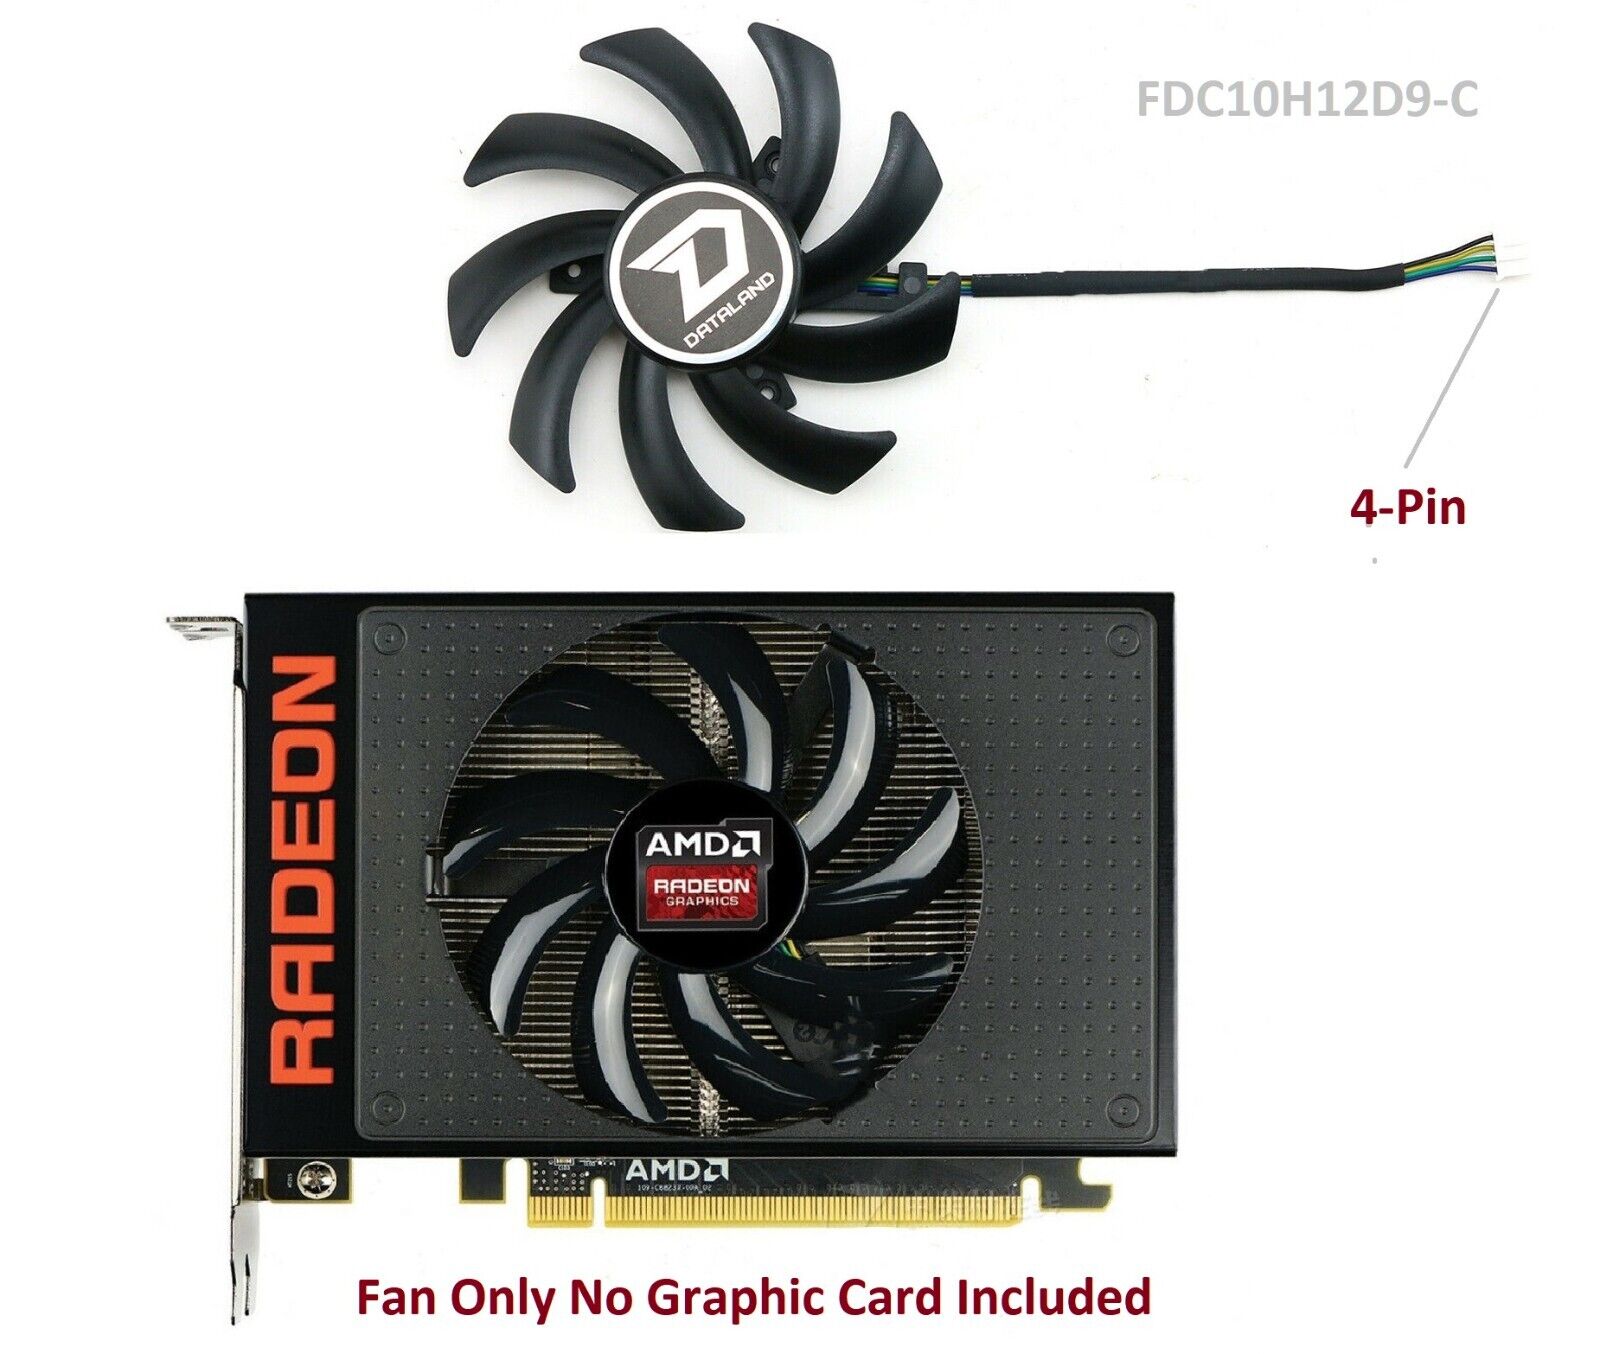 FDC10H12D9-C Cooling Fan for AMD / Dylan / ASUS R9 Nano 4G HBM Video Card